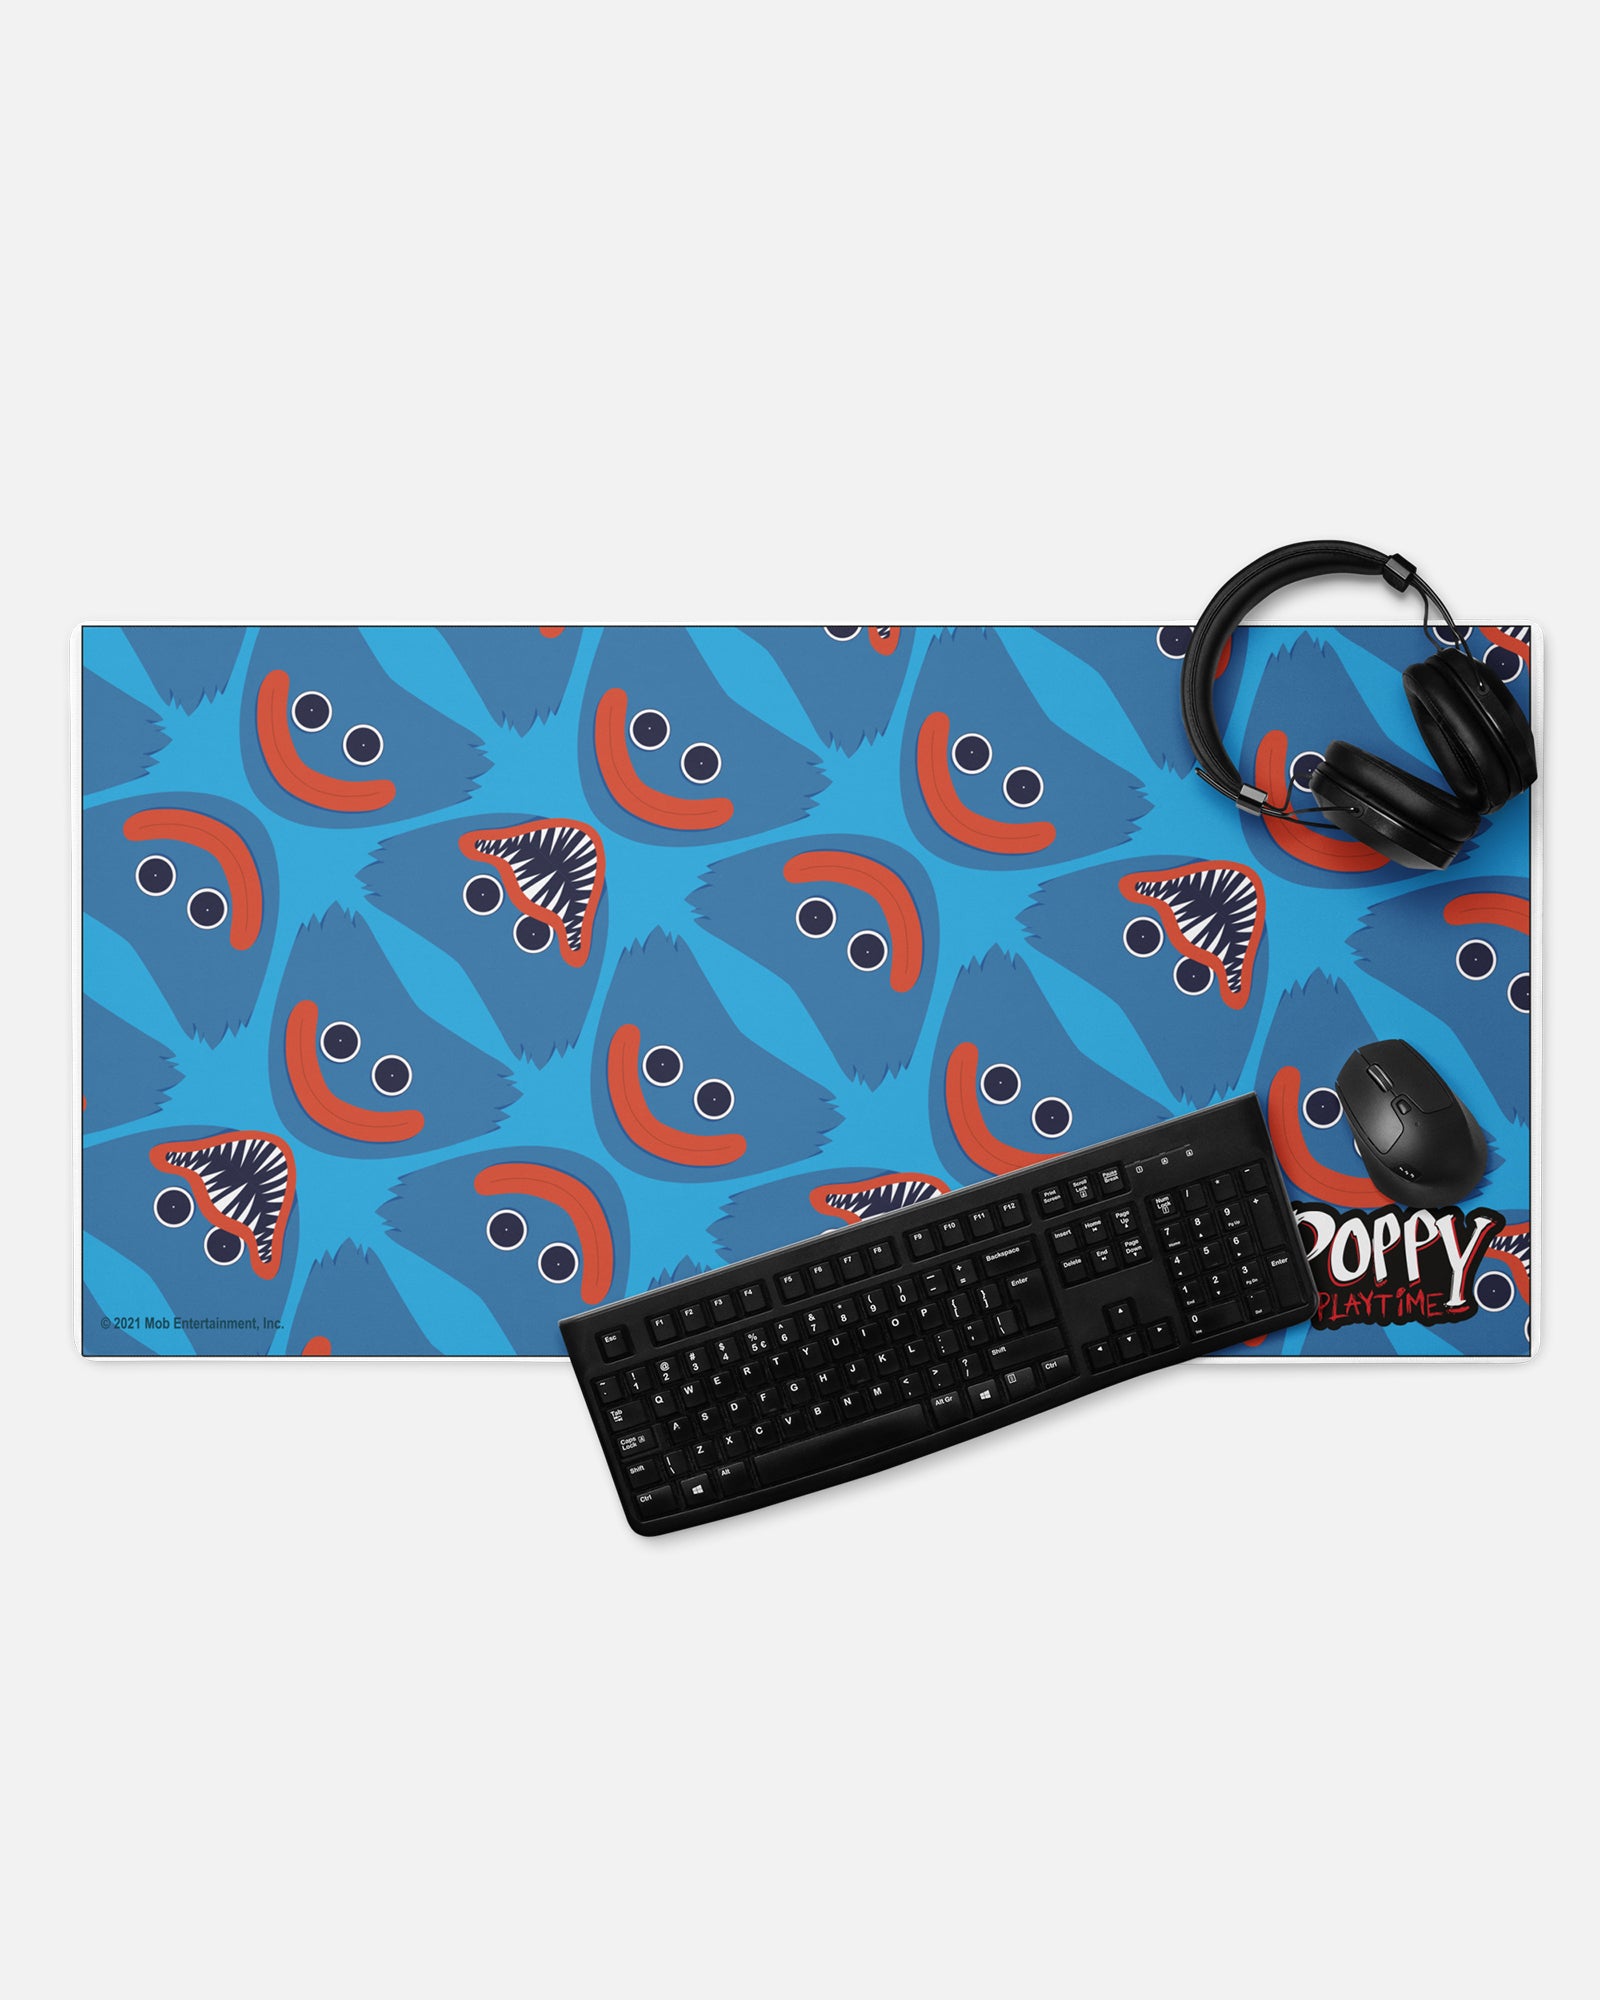 huggy wuggy gamer mousepad with headphones, keyboard, and mouse to show example of gaming set up. image: repeating pattern of evil and good huggy faces. text: poppy playtime